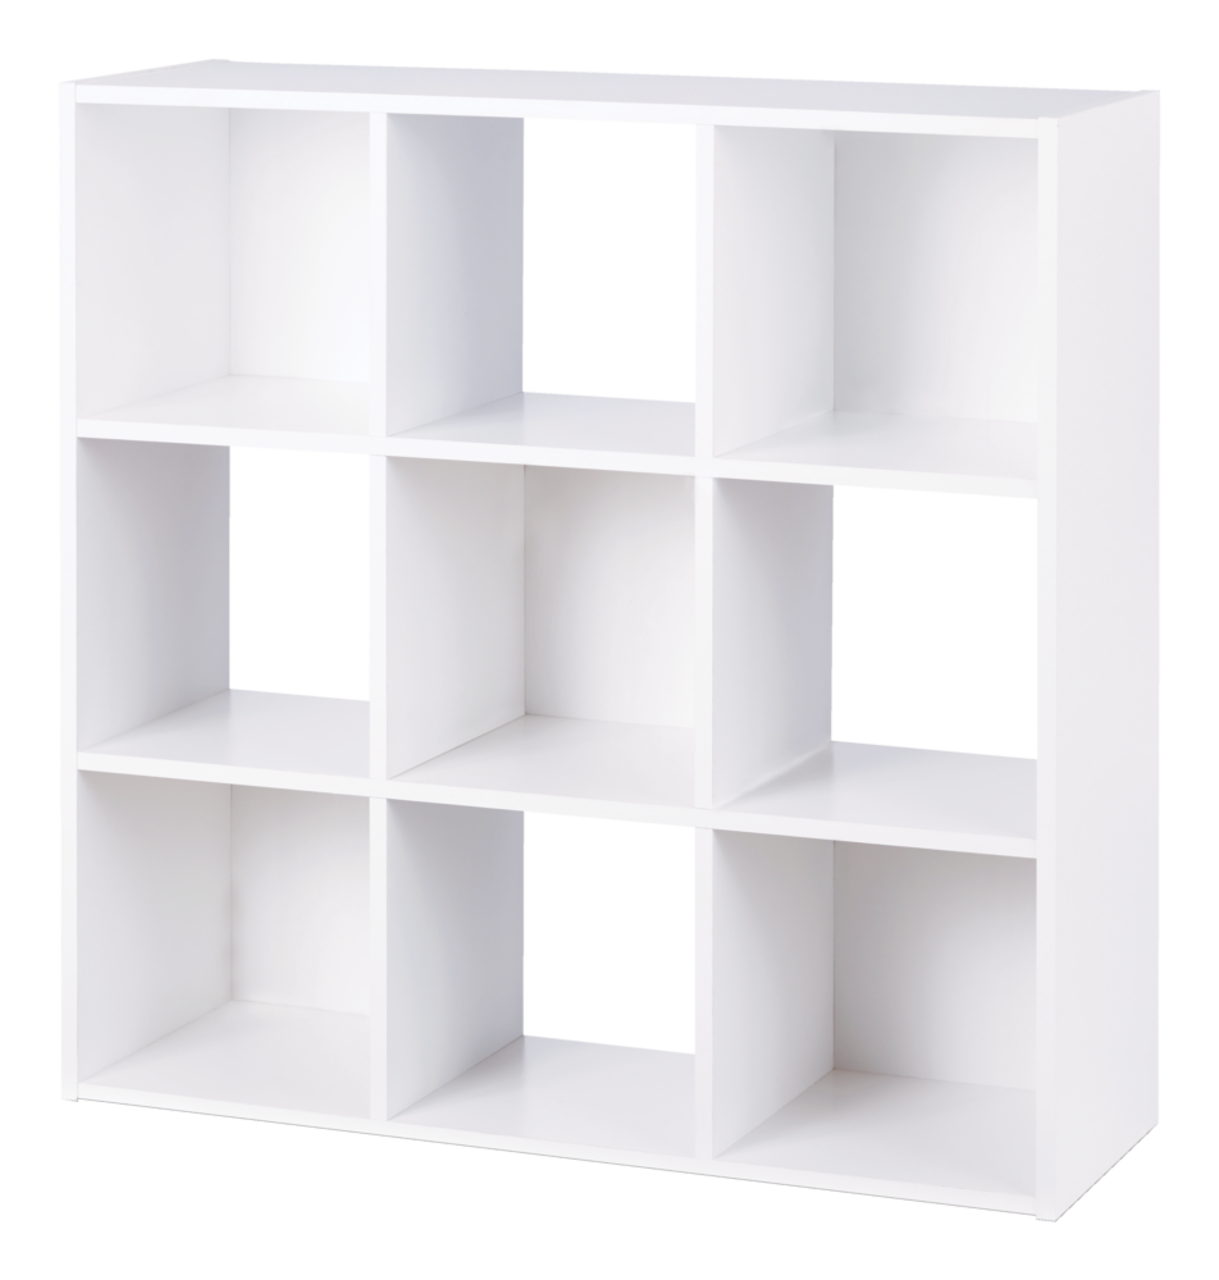 https://media-www.canadiantire.ca/product/living/home-decor/furniture/0680410/for-living-9-cube-cabinet-white-725bf967-1d64-435e-8110-dfcf3335a4fe.png?imdensity=1&imwidth=640&impolicy=mZoom